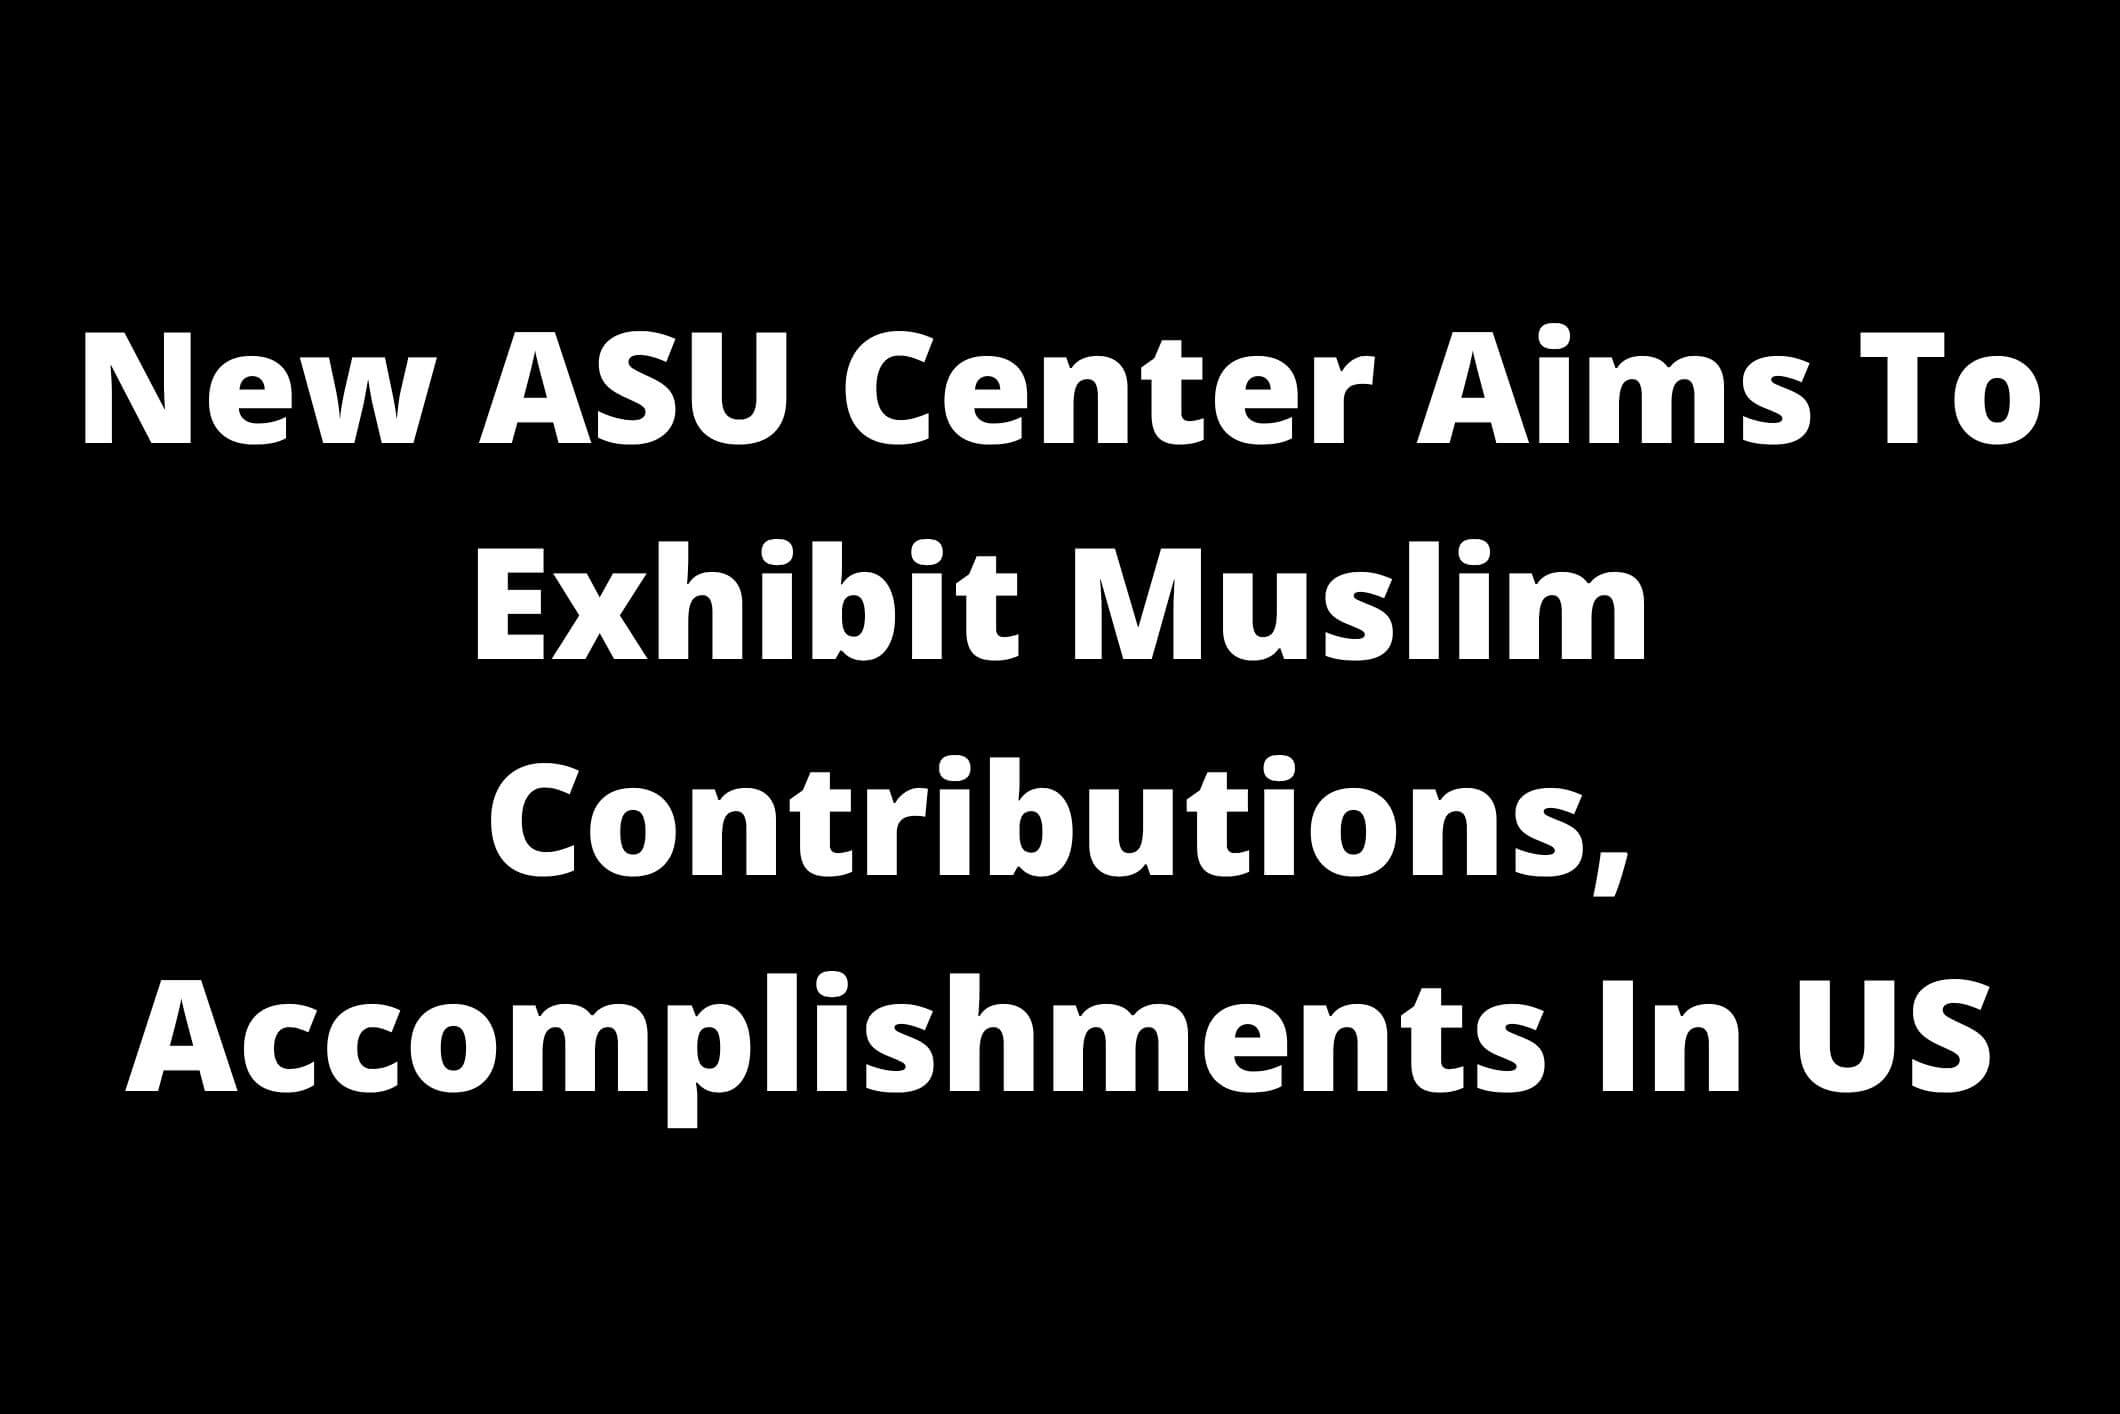 New ASU Center Aims To Exhibit Muslim Contributions, Accomplishments In US